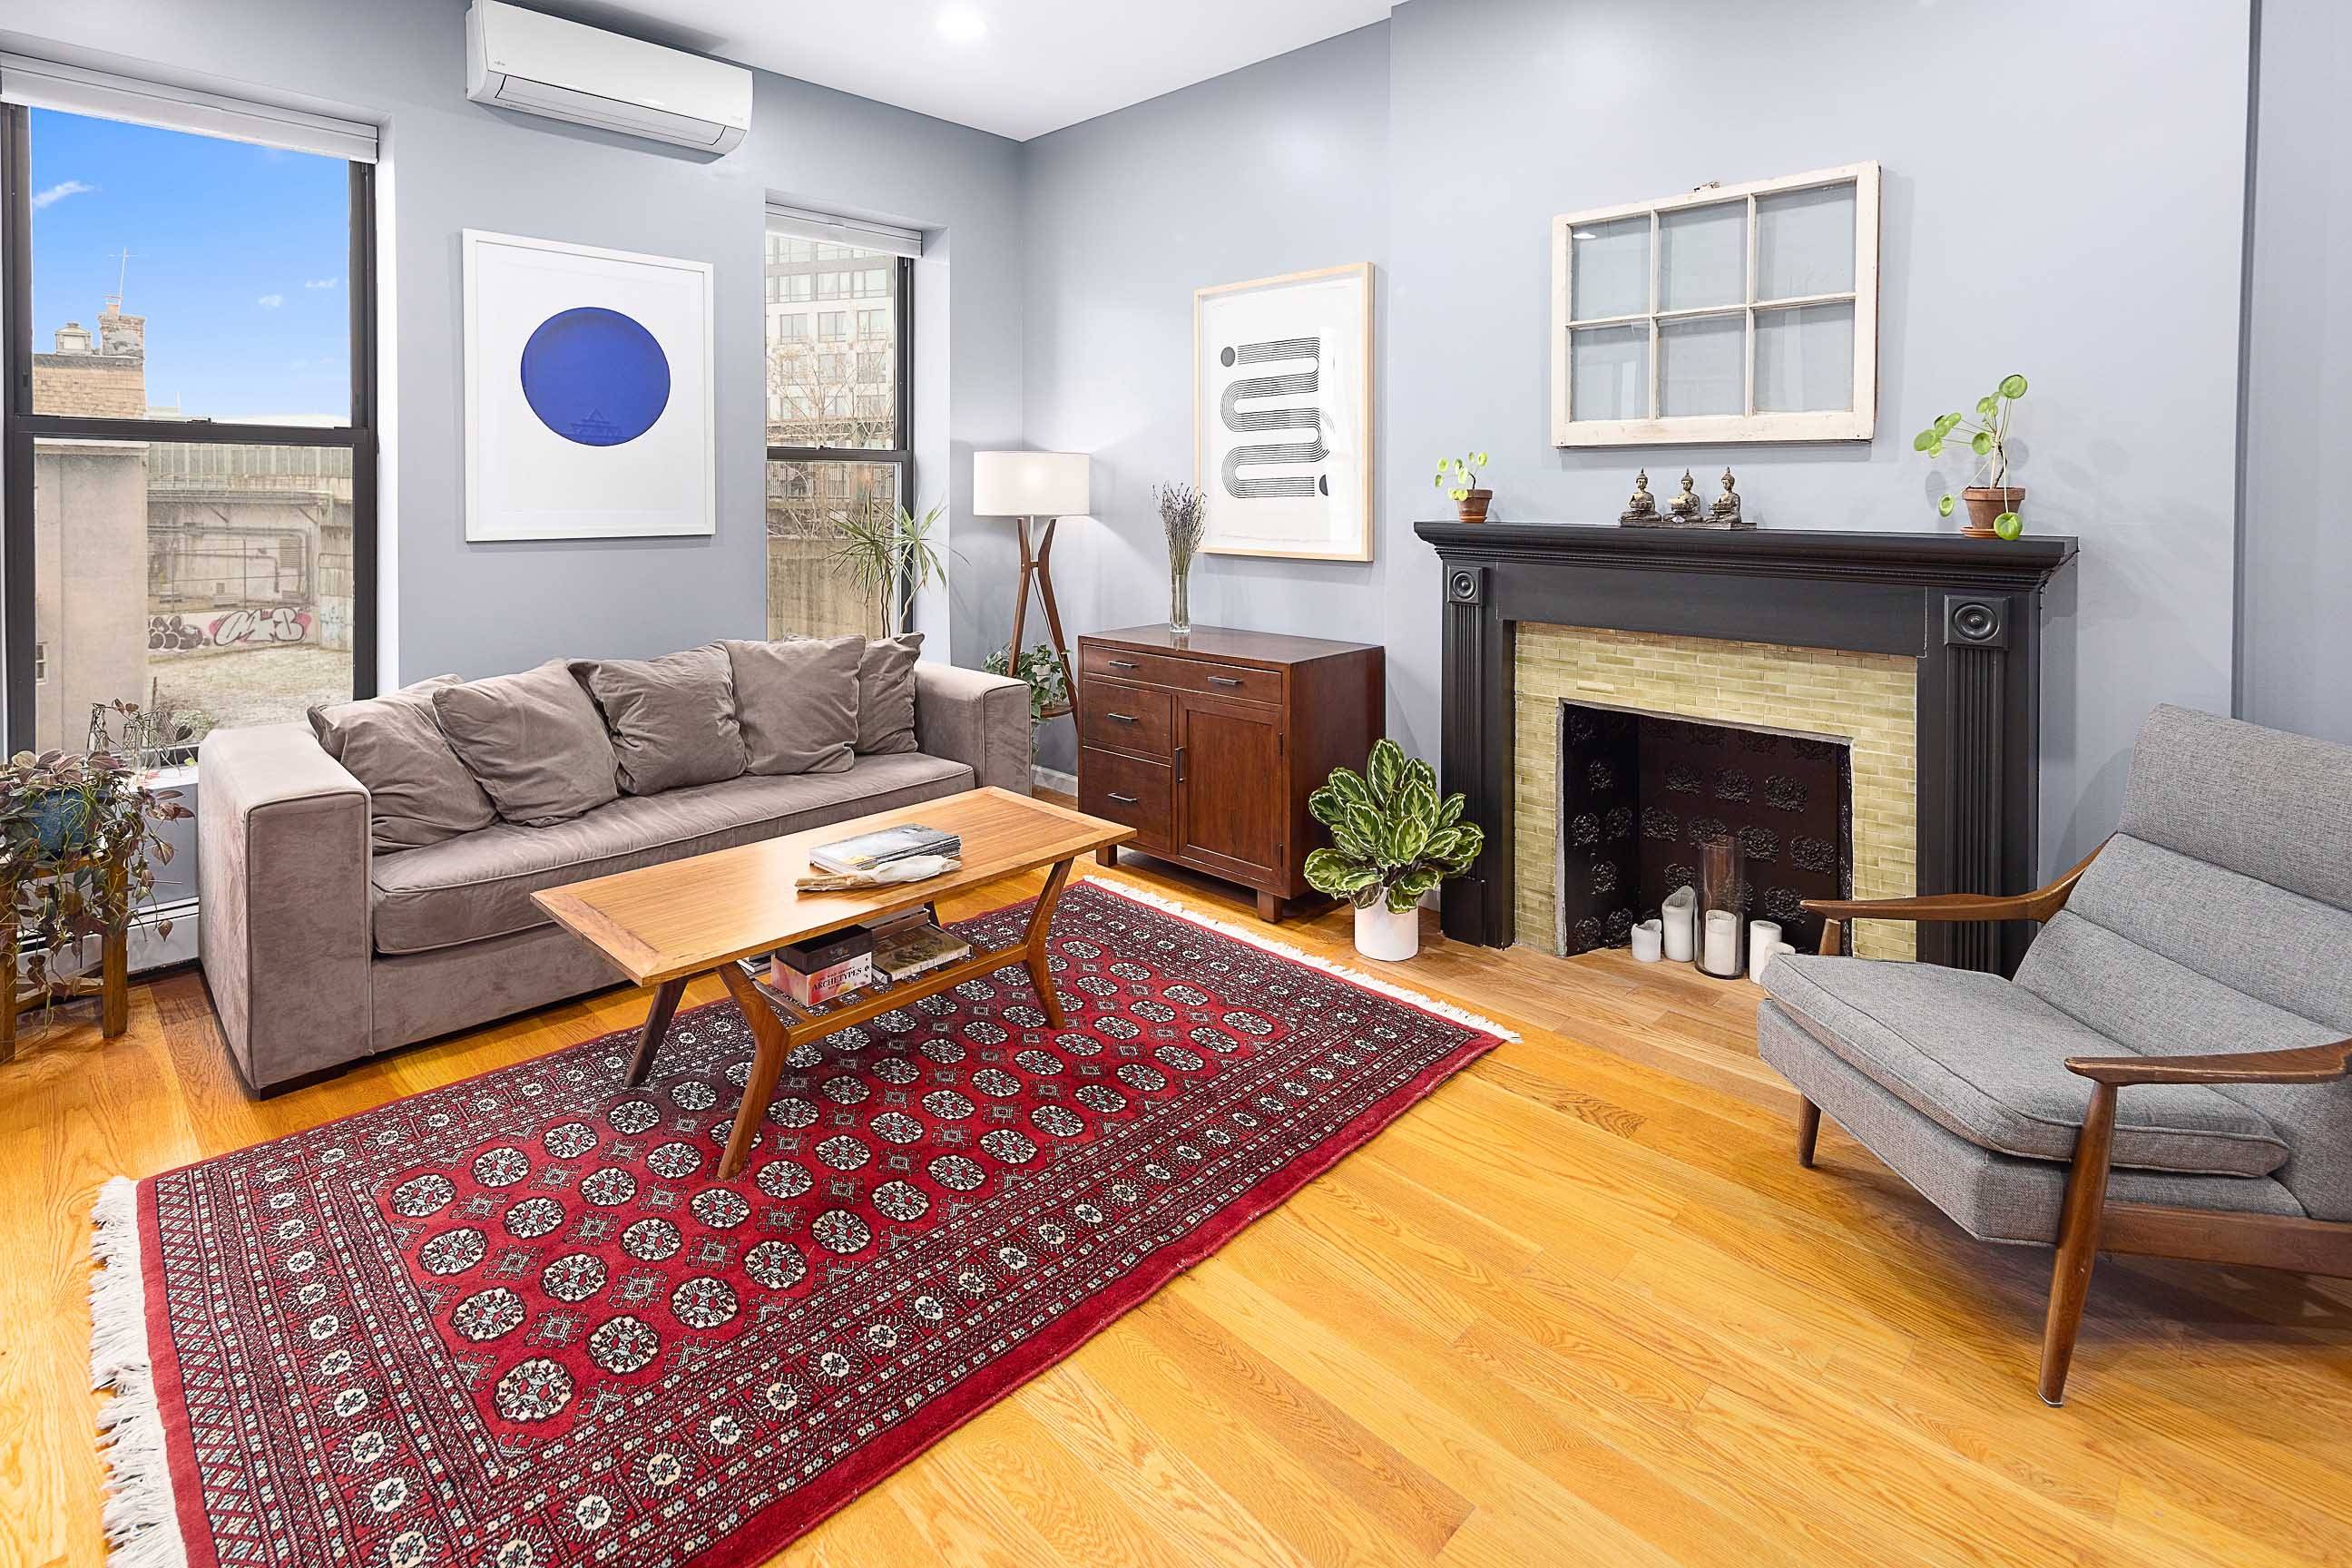 Beautifully designed 2 bed 1 bath 775 sq ft condo in a quintessential 1930s Bed Stuy townhouse.